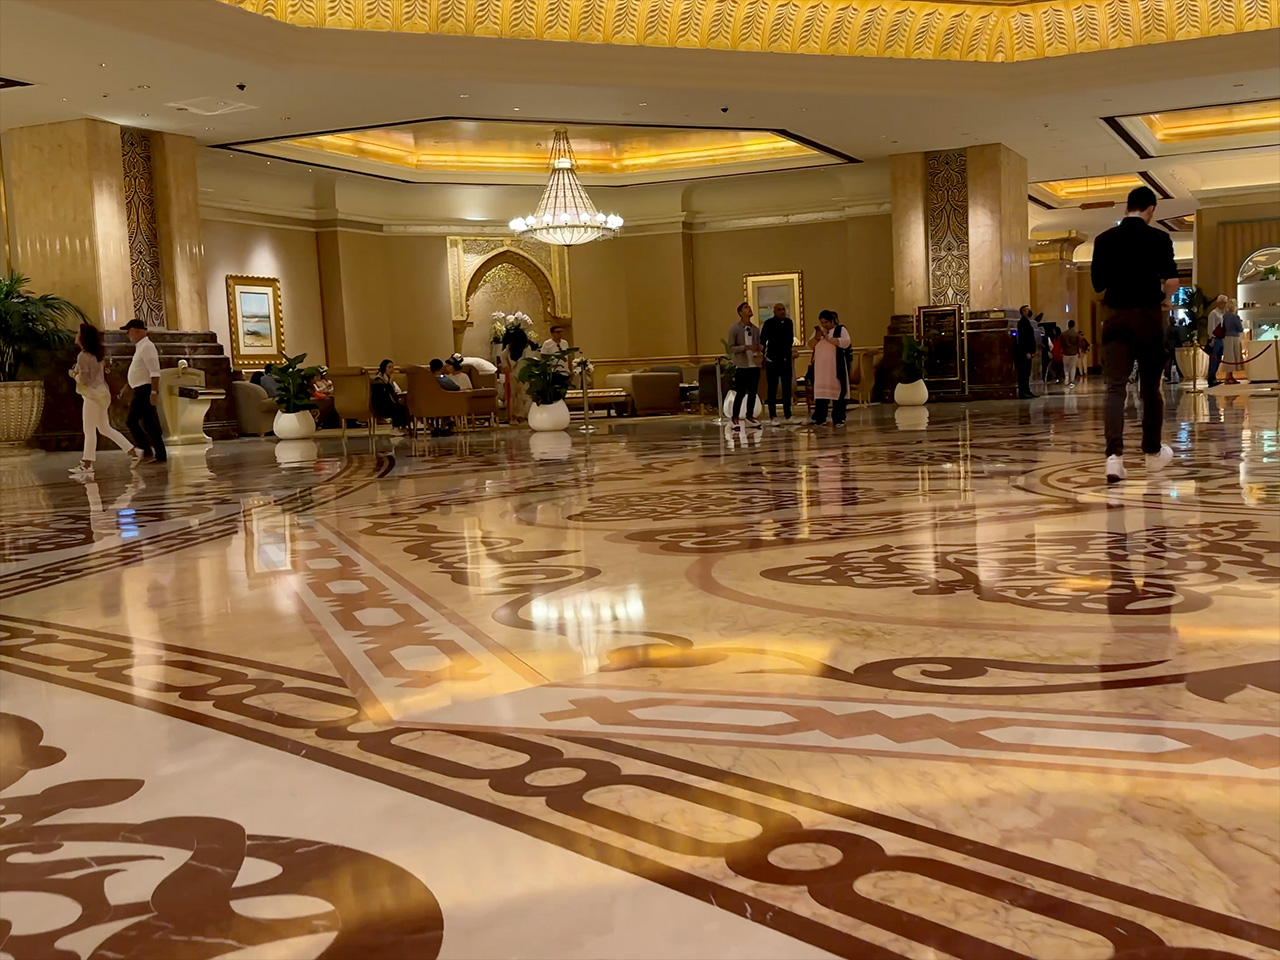 Die Lobby des Emirates Palace Hotels